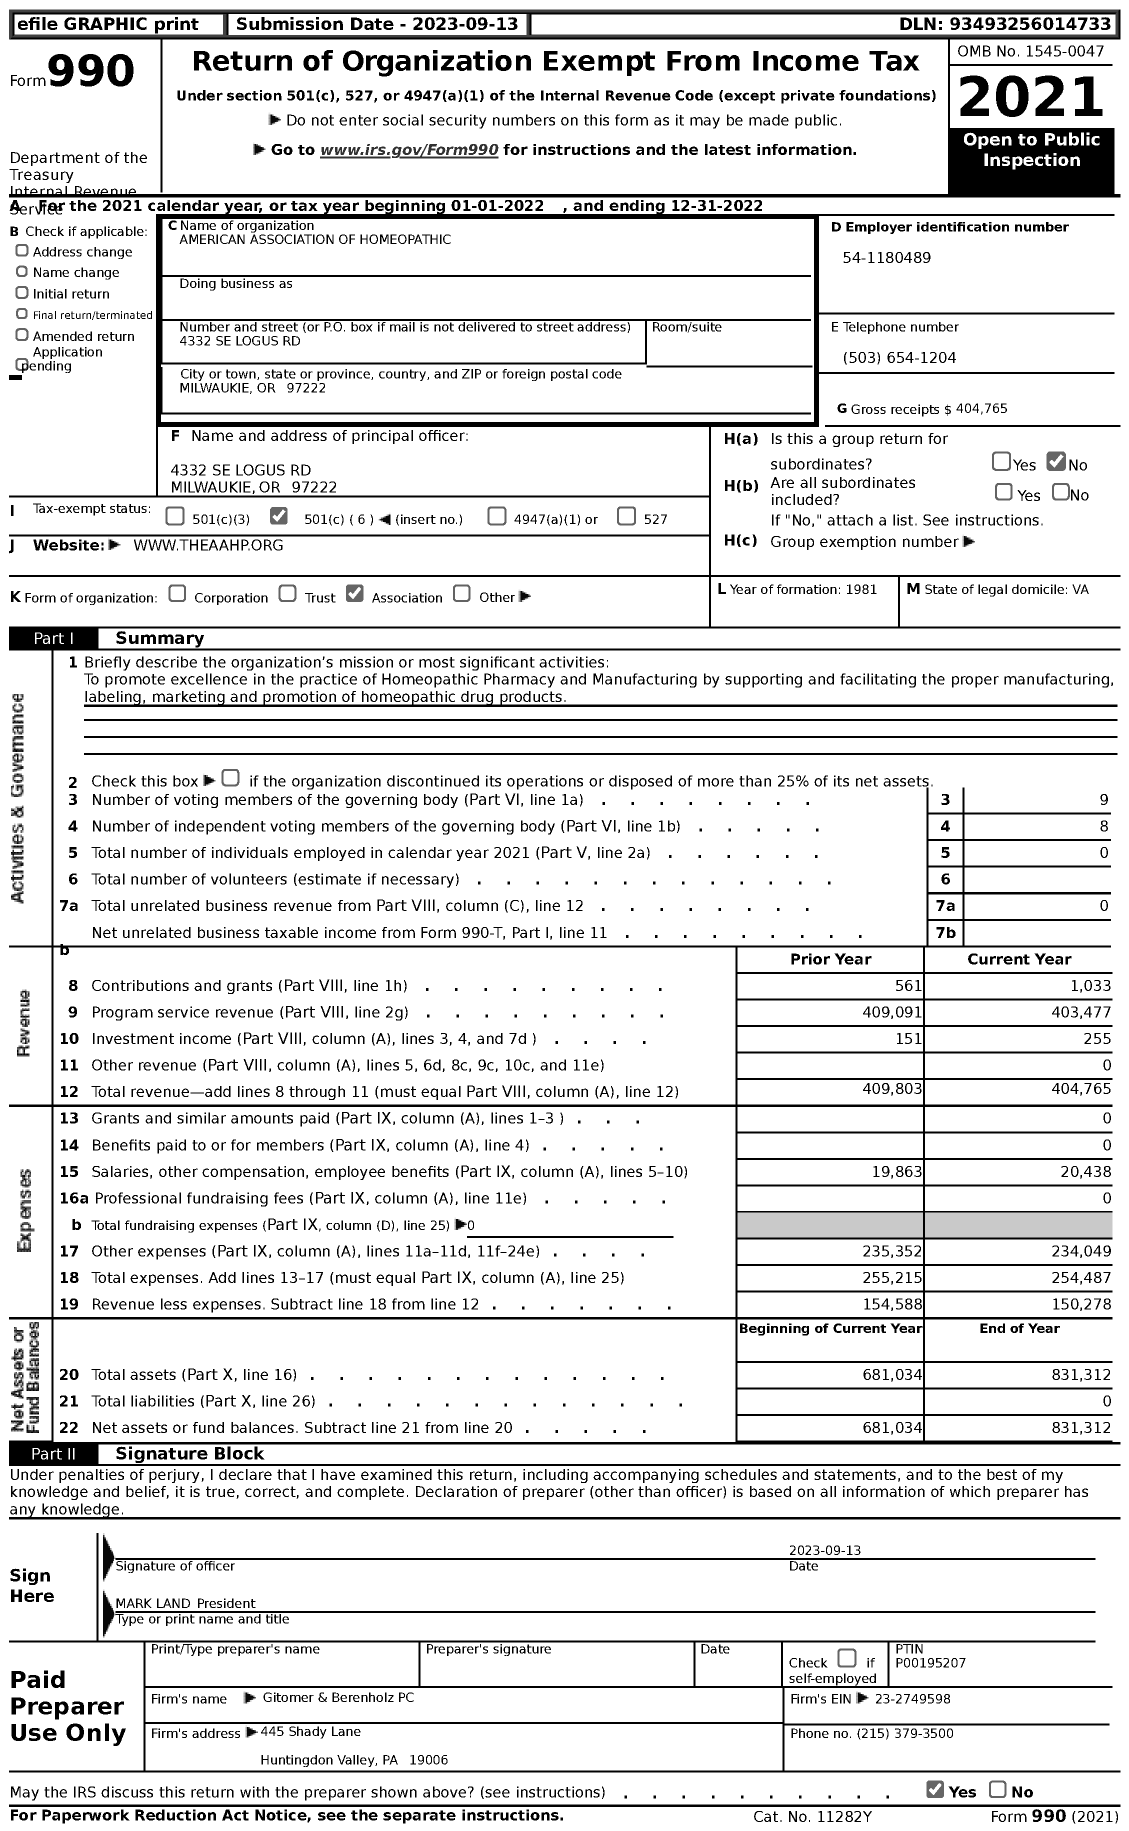 Image of first page of 2022 Form 990 for American Association of Homeopathic